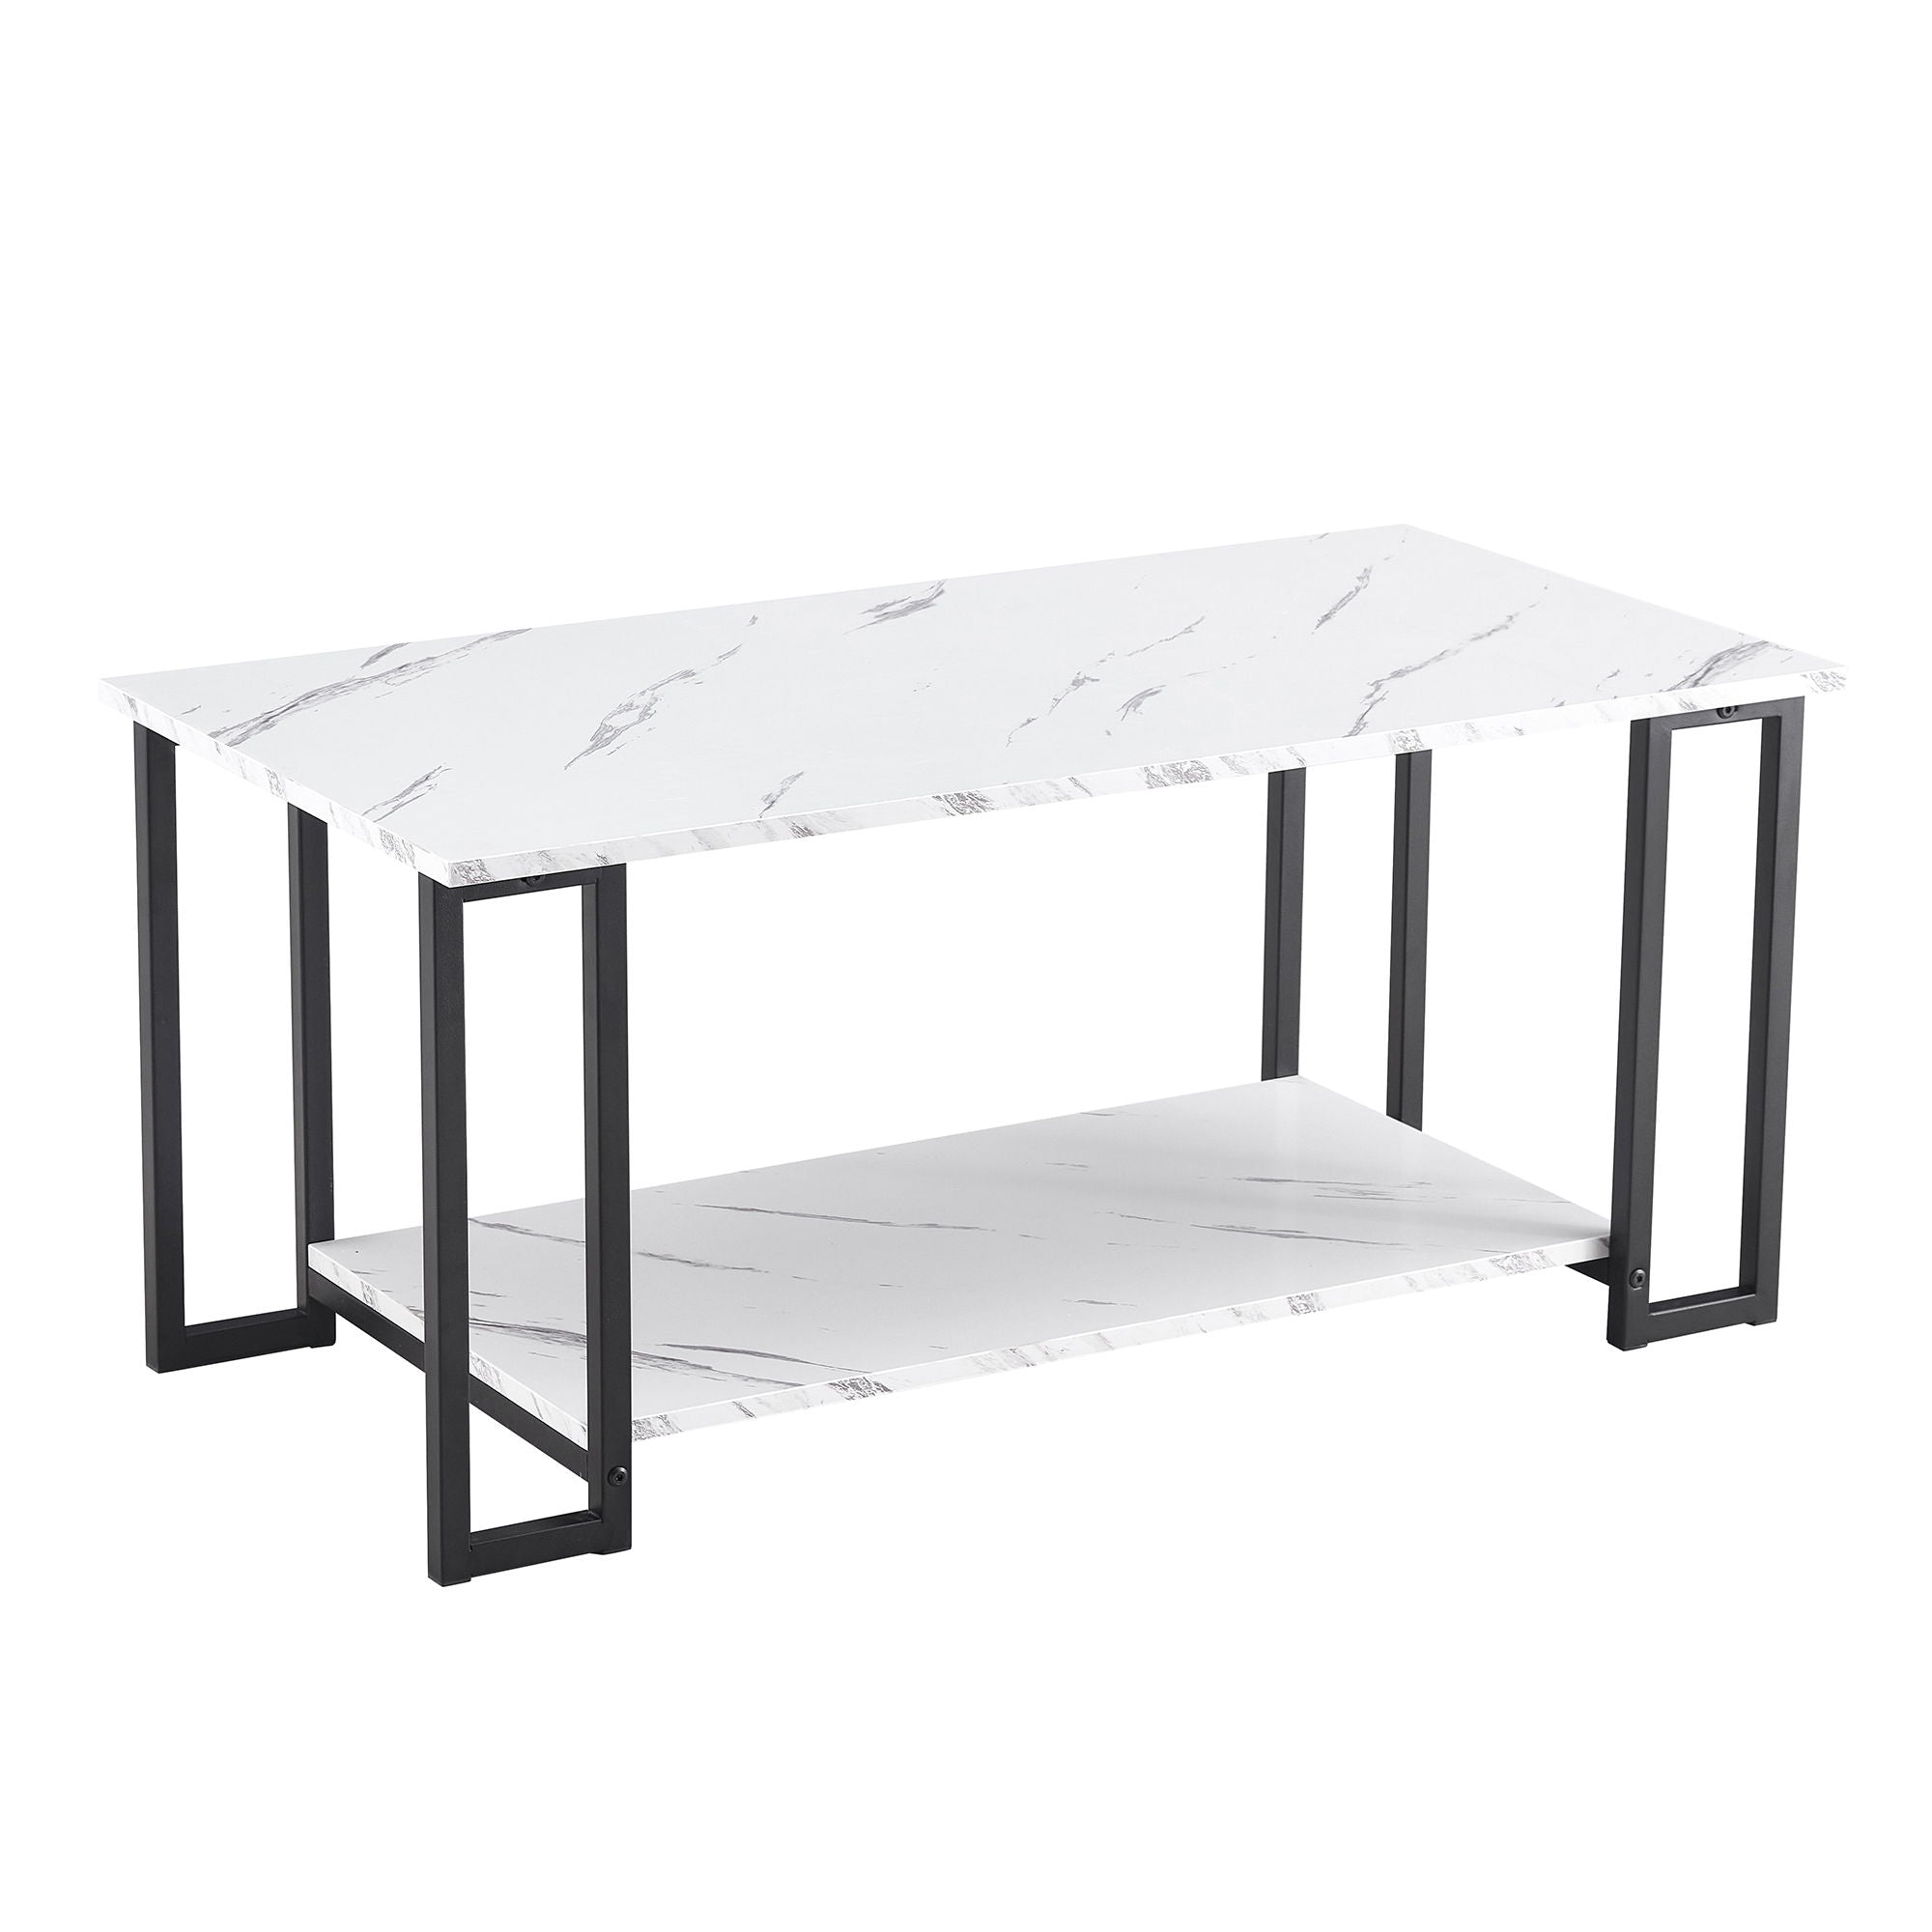 D & N Coffee Table, 2 Layers 1.5Cm Thick Marble MDF Rectangle 39.37" L Tabletop Iron Coffee Table, Dining Room, Coffee Shop, Resterant - White Top - Black Leg